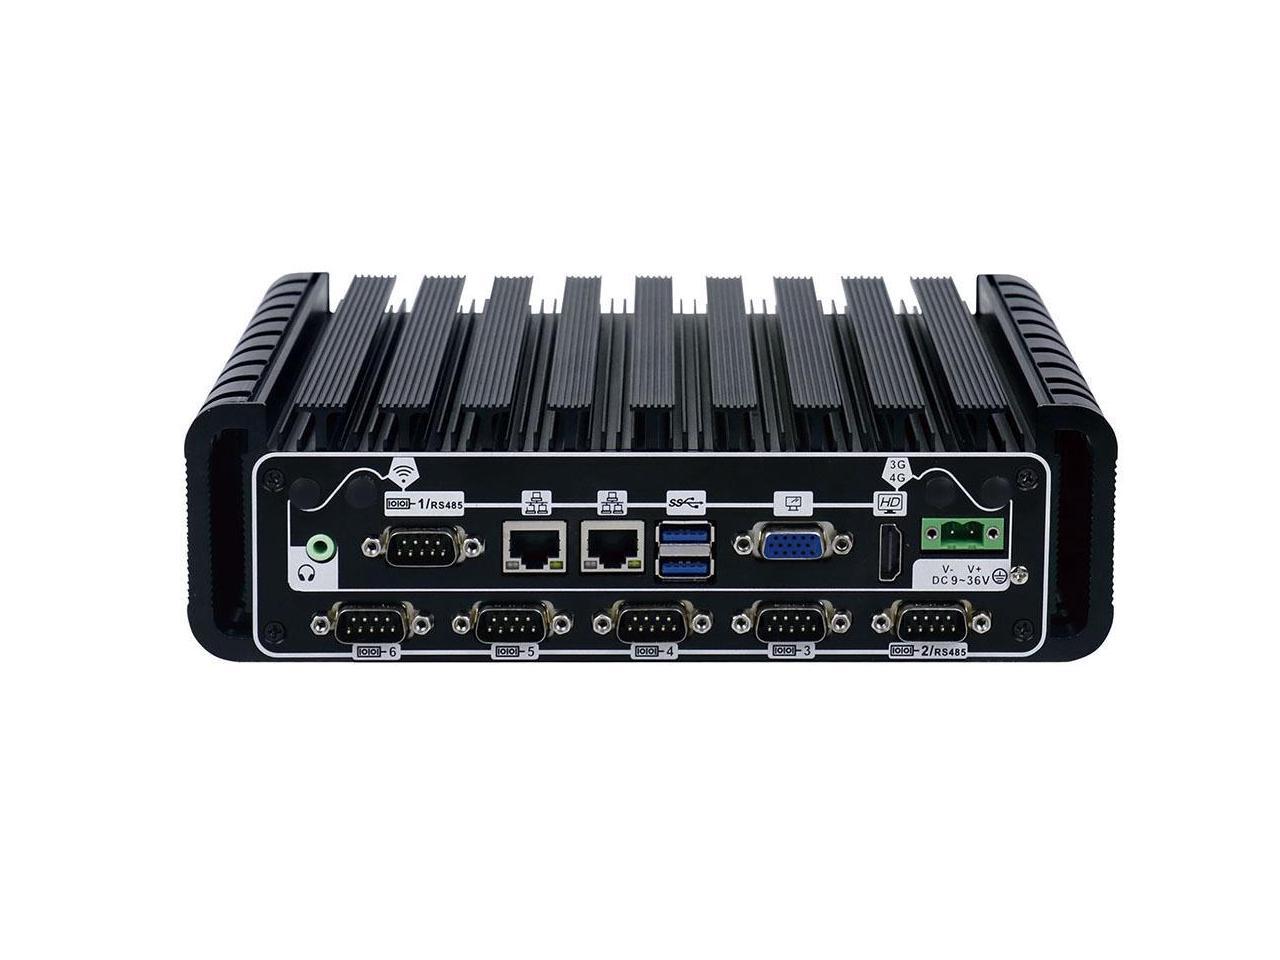 Fanless Industrial PC Rugged Computer IPC Mini PC Windows 10 Pro/ Linux with Intel Core I5 4200U 9 to 36V 4 RS232 6 RS485 2 Intel 82583V LAN 3G 4G WiFi Support SIM Slot 8G RAM 500G HDD I12